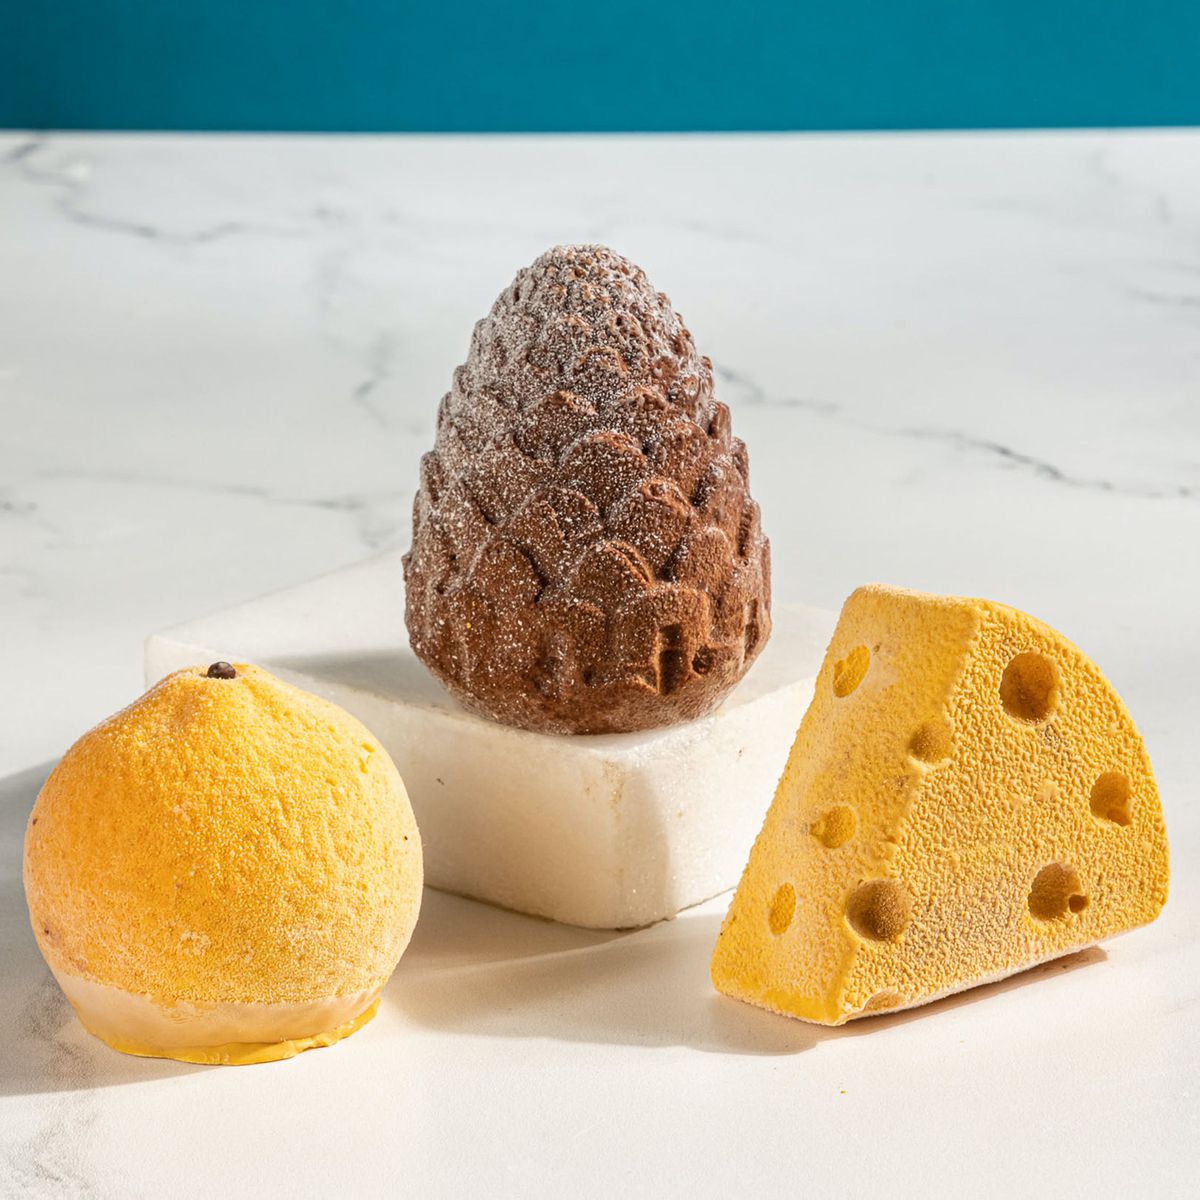 Ice cream shaped like a lemon, pinecone, and wedge of cheese